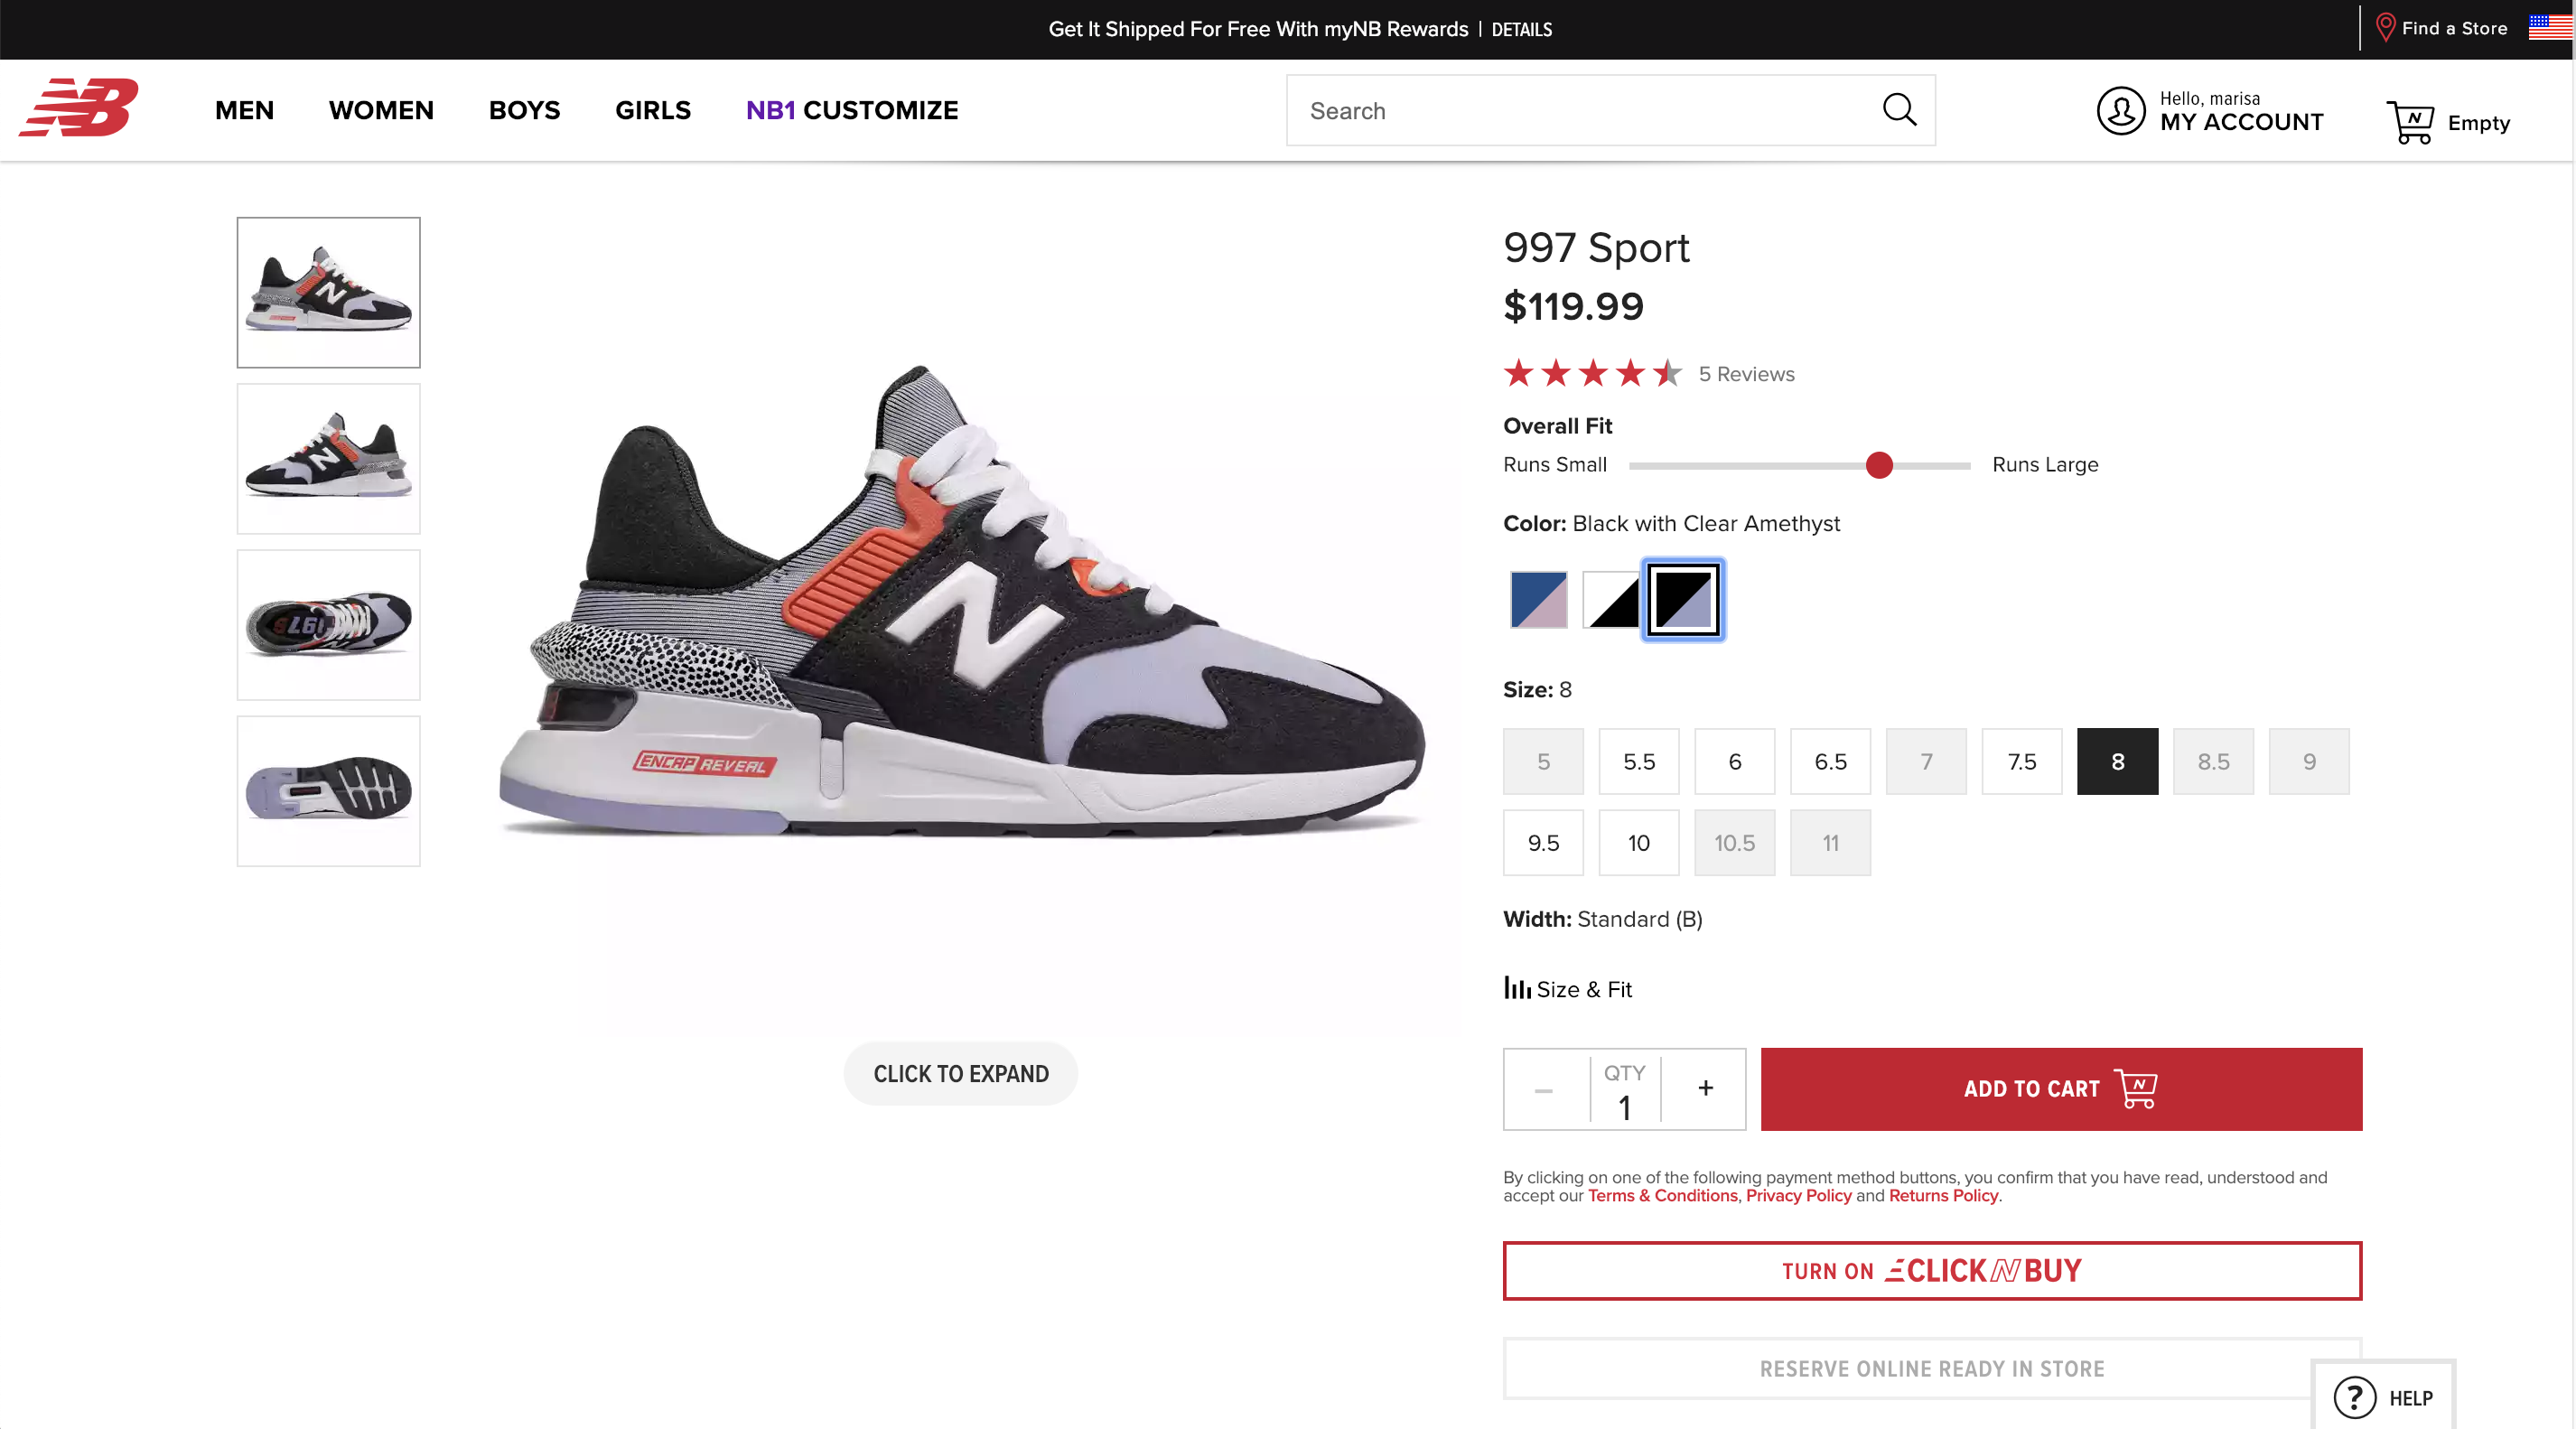 new-balance-997sport-shoe-product-detail-page